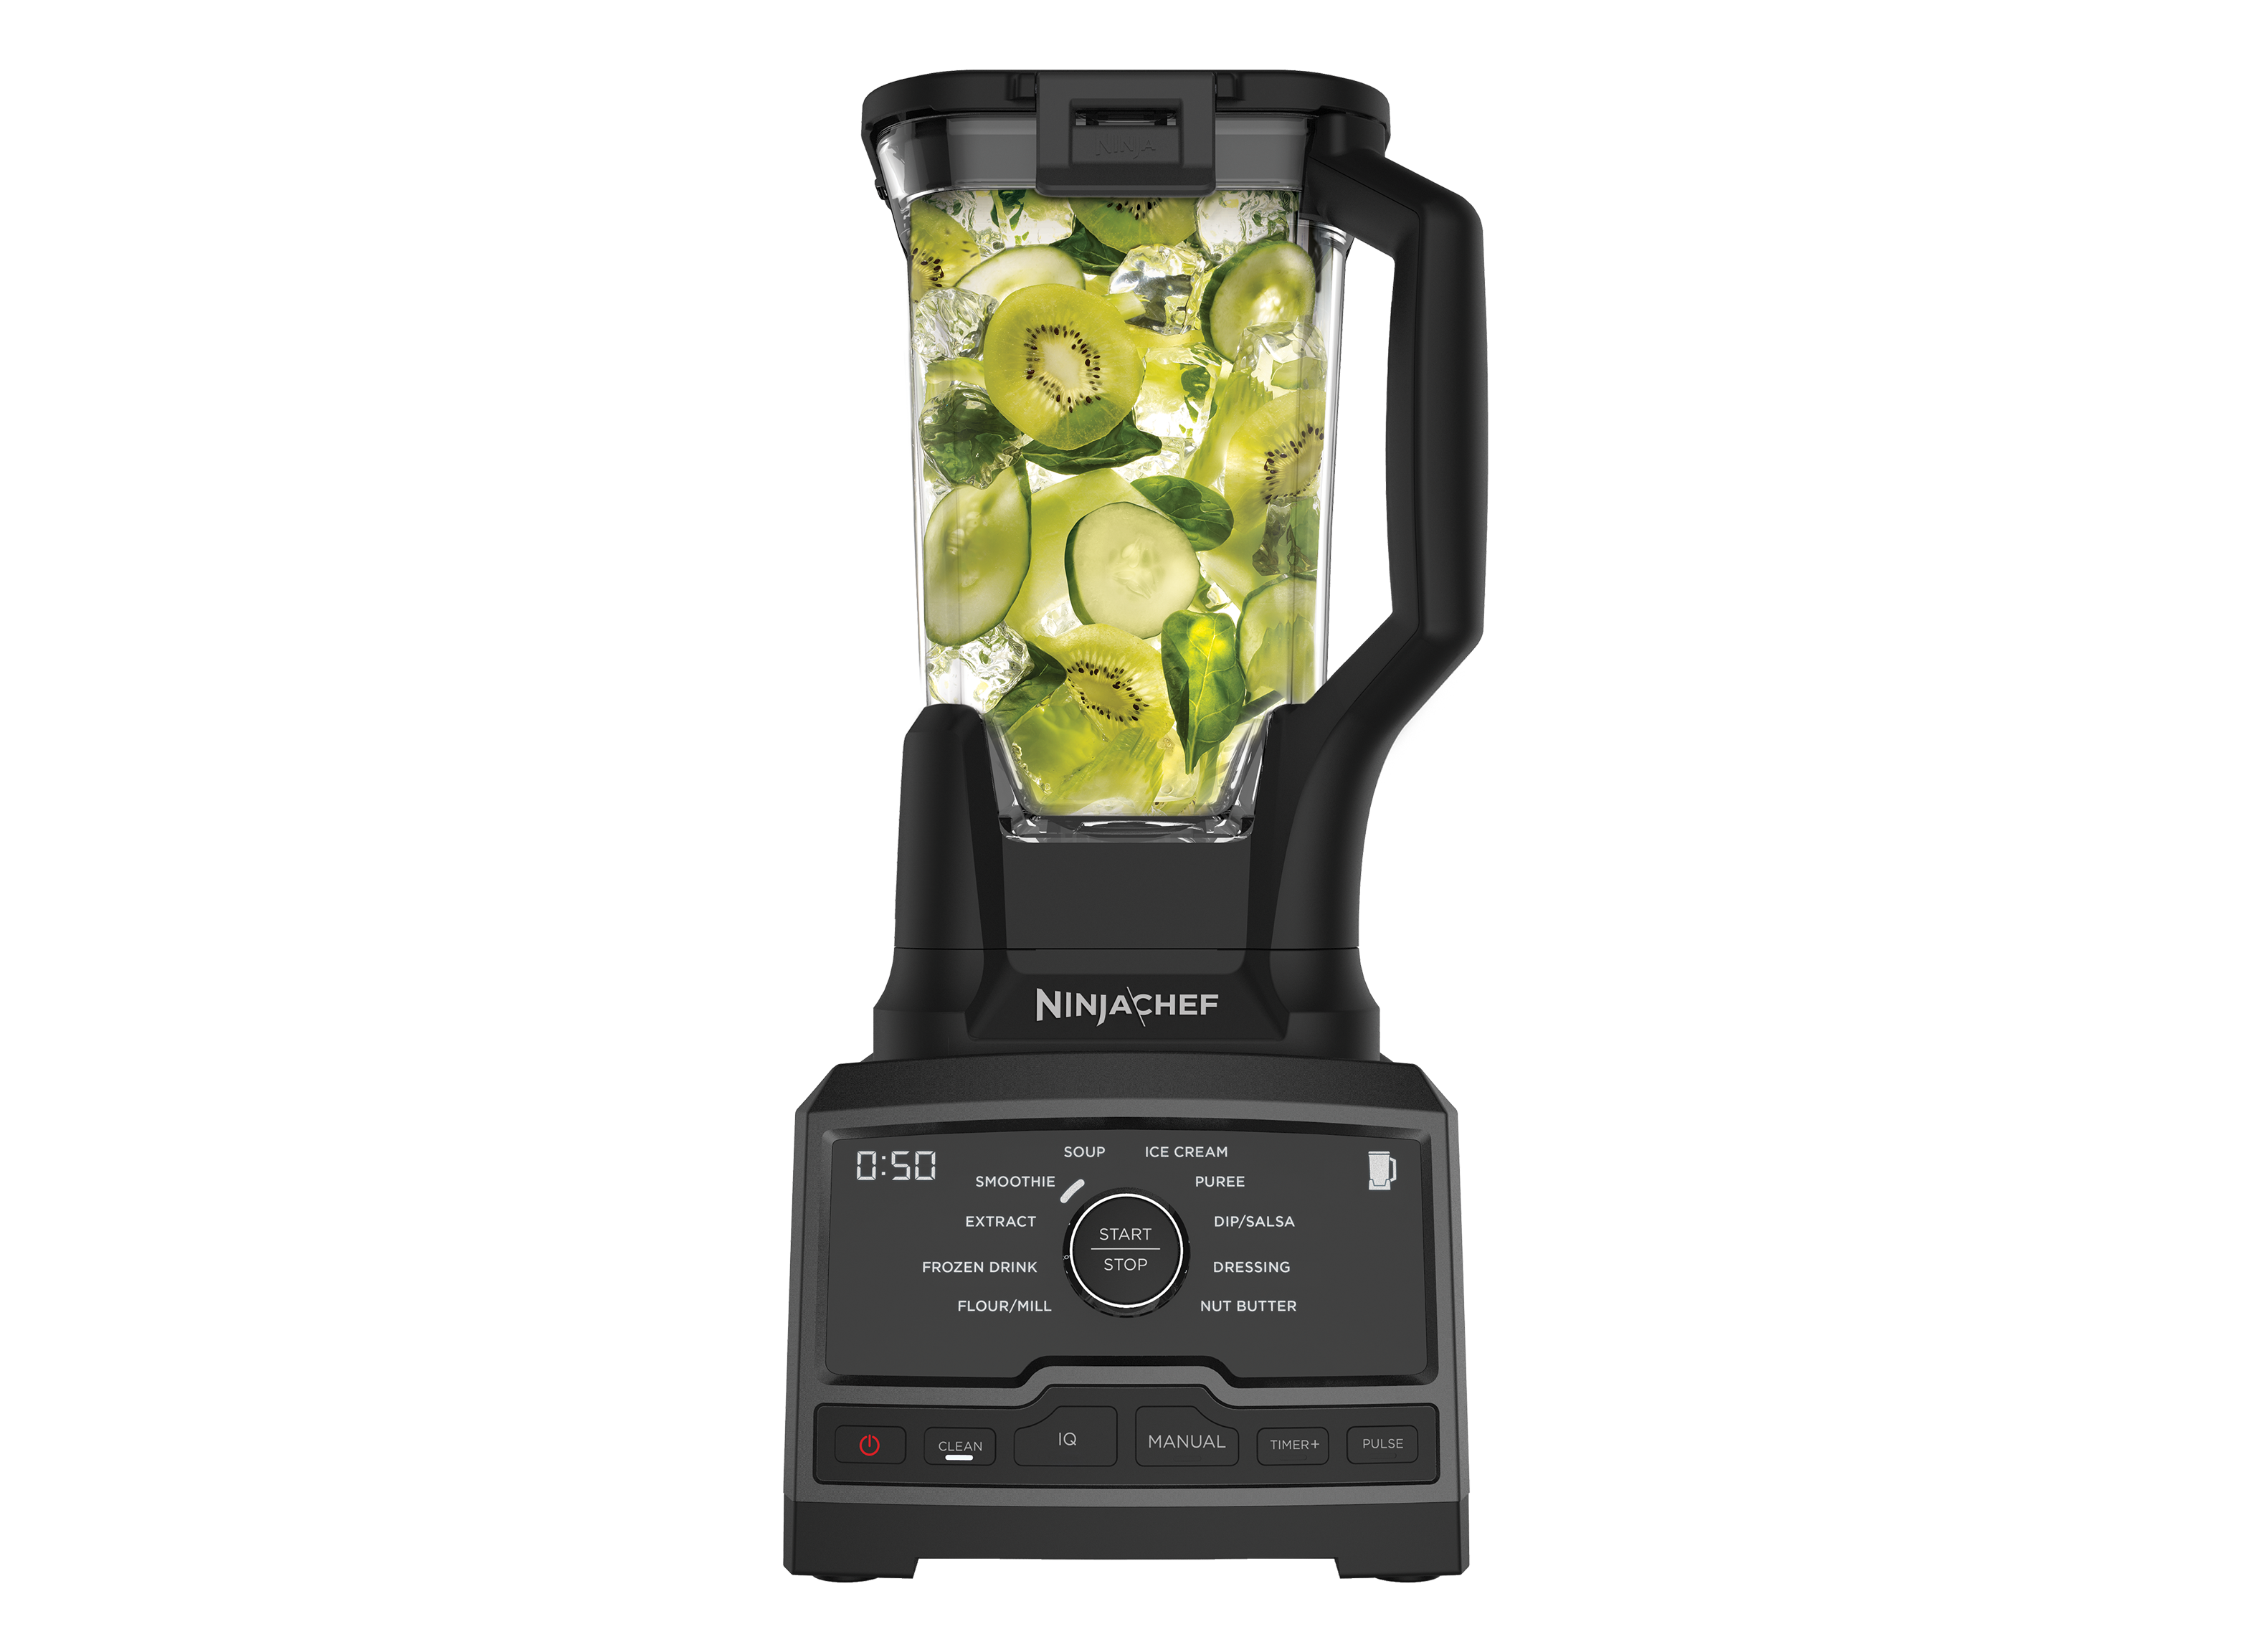 https://crdms.images.consumerreports.org/prod/products/cr/models/395659-full-size-blender-ninja-chef-high-speed-ct805-62238.png